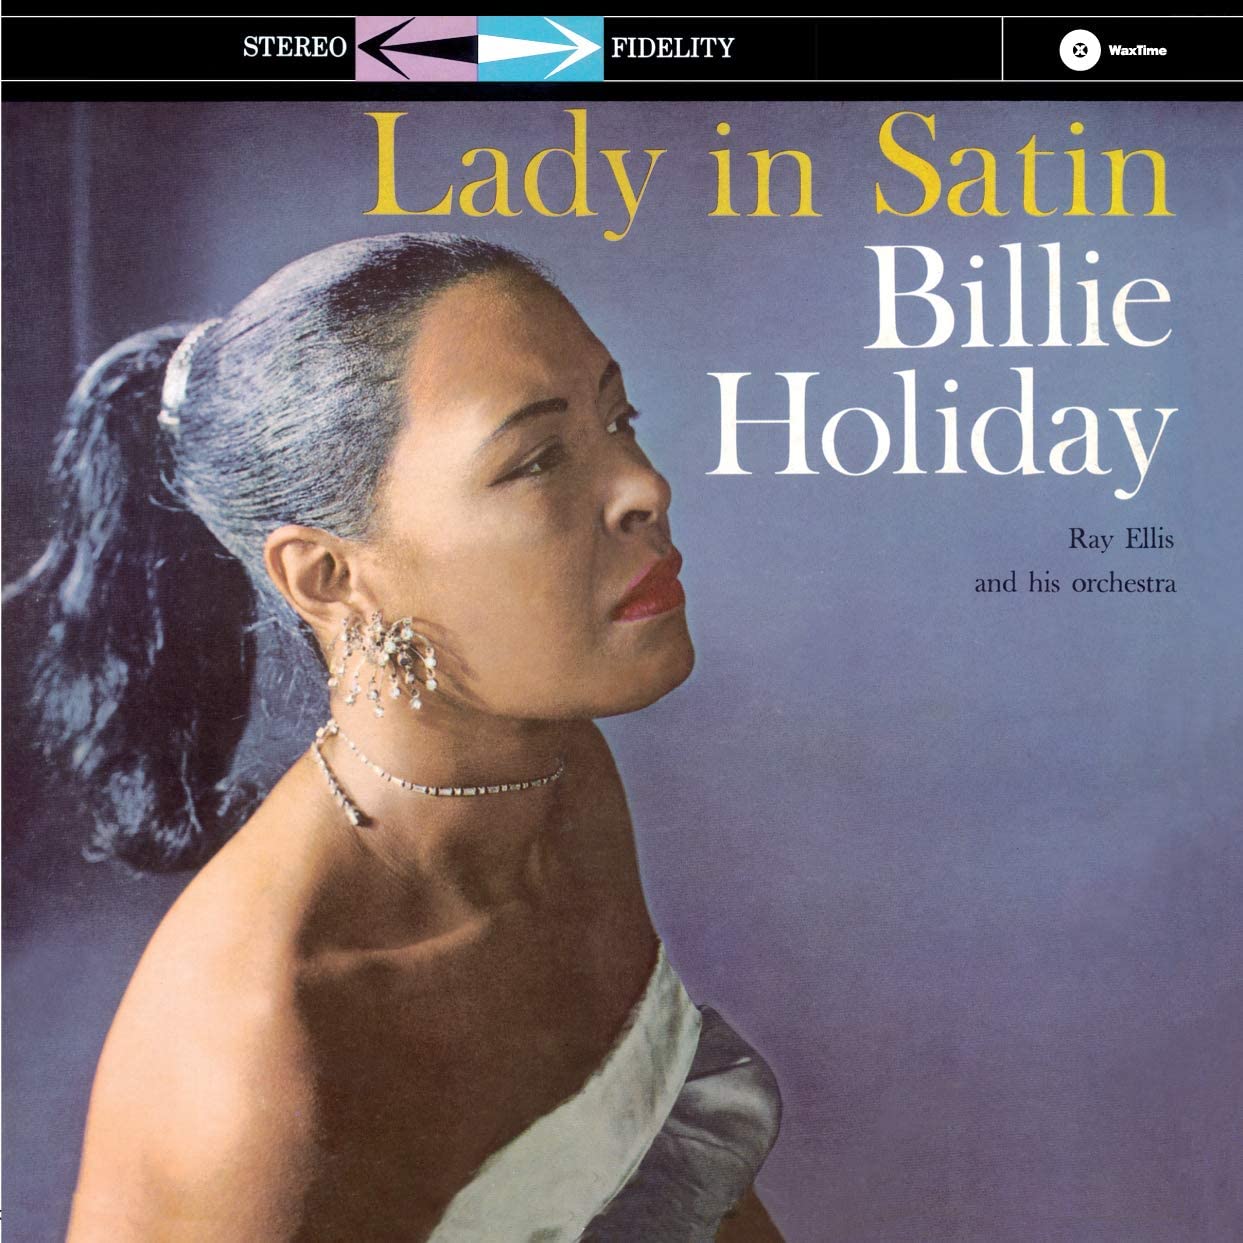 LP - Billie Holiday - Lady In Satin